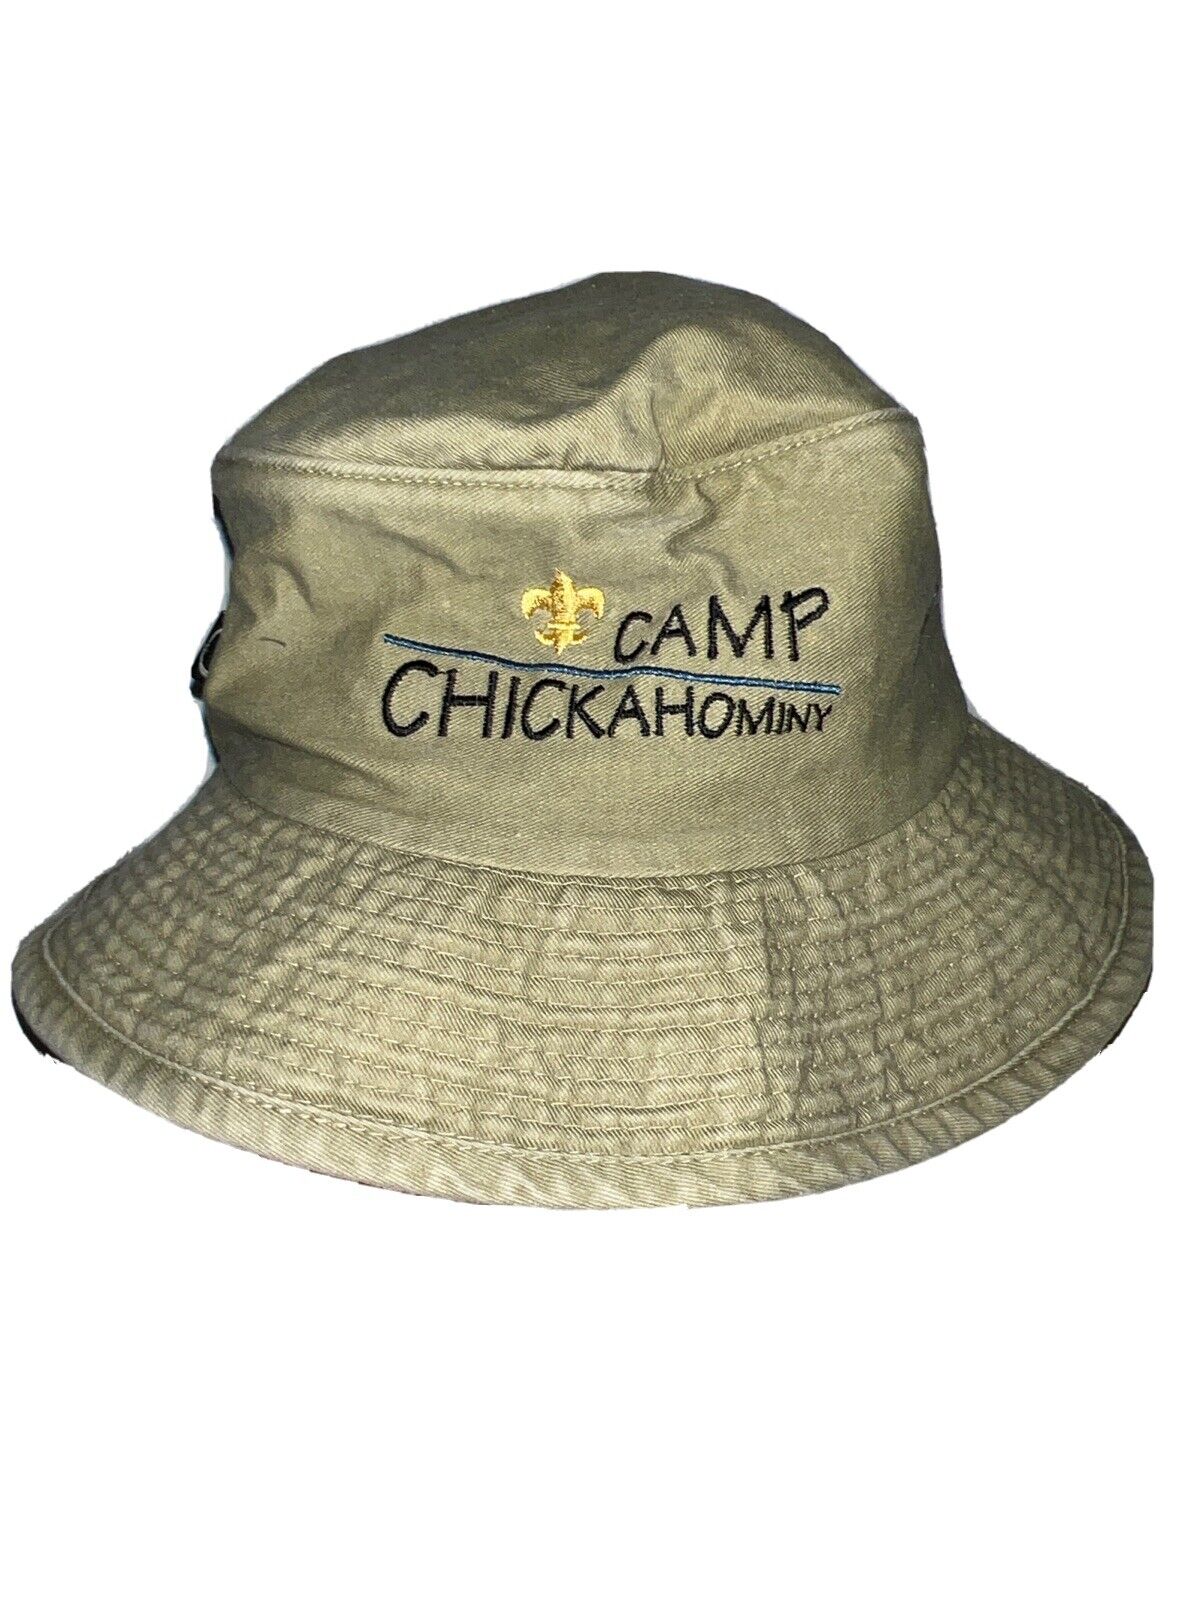 Boy Scout Camp Chickahominy Bucket Hat Ouray Sportswear by SCI 100% Cotton